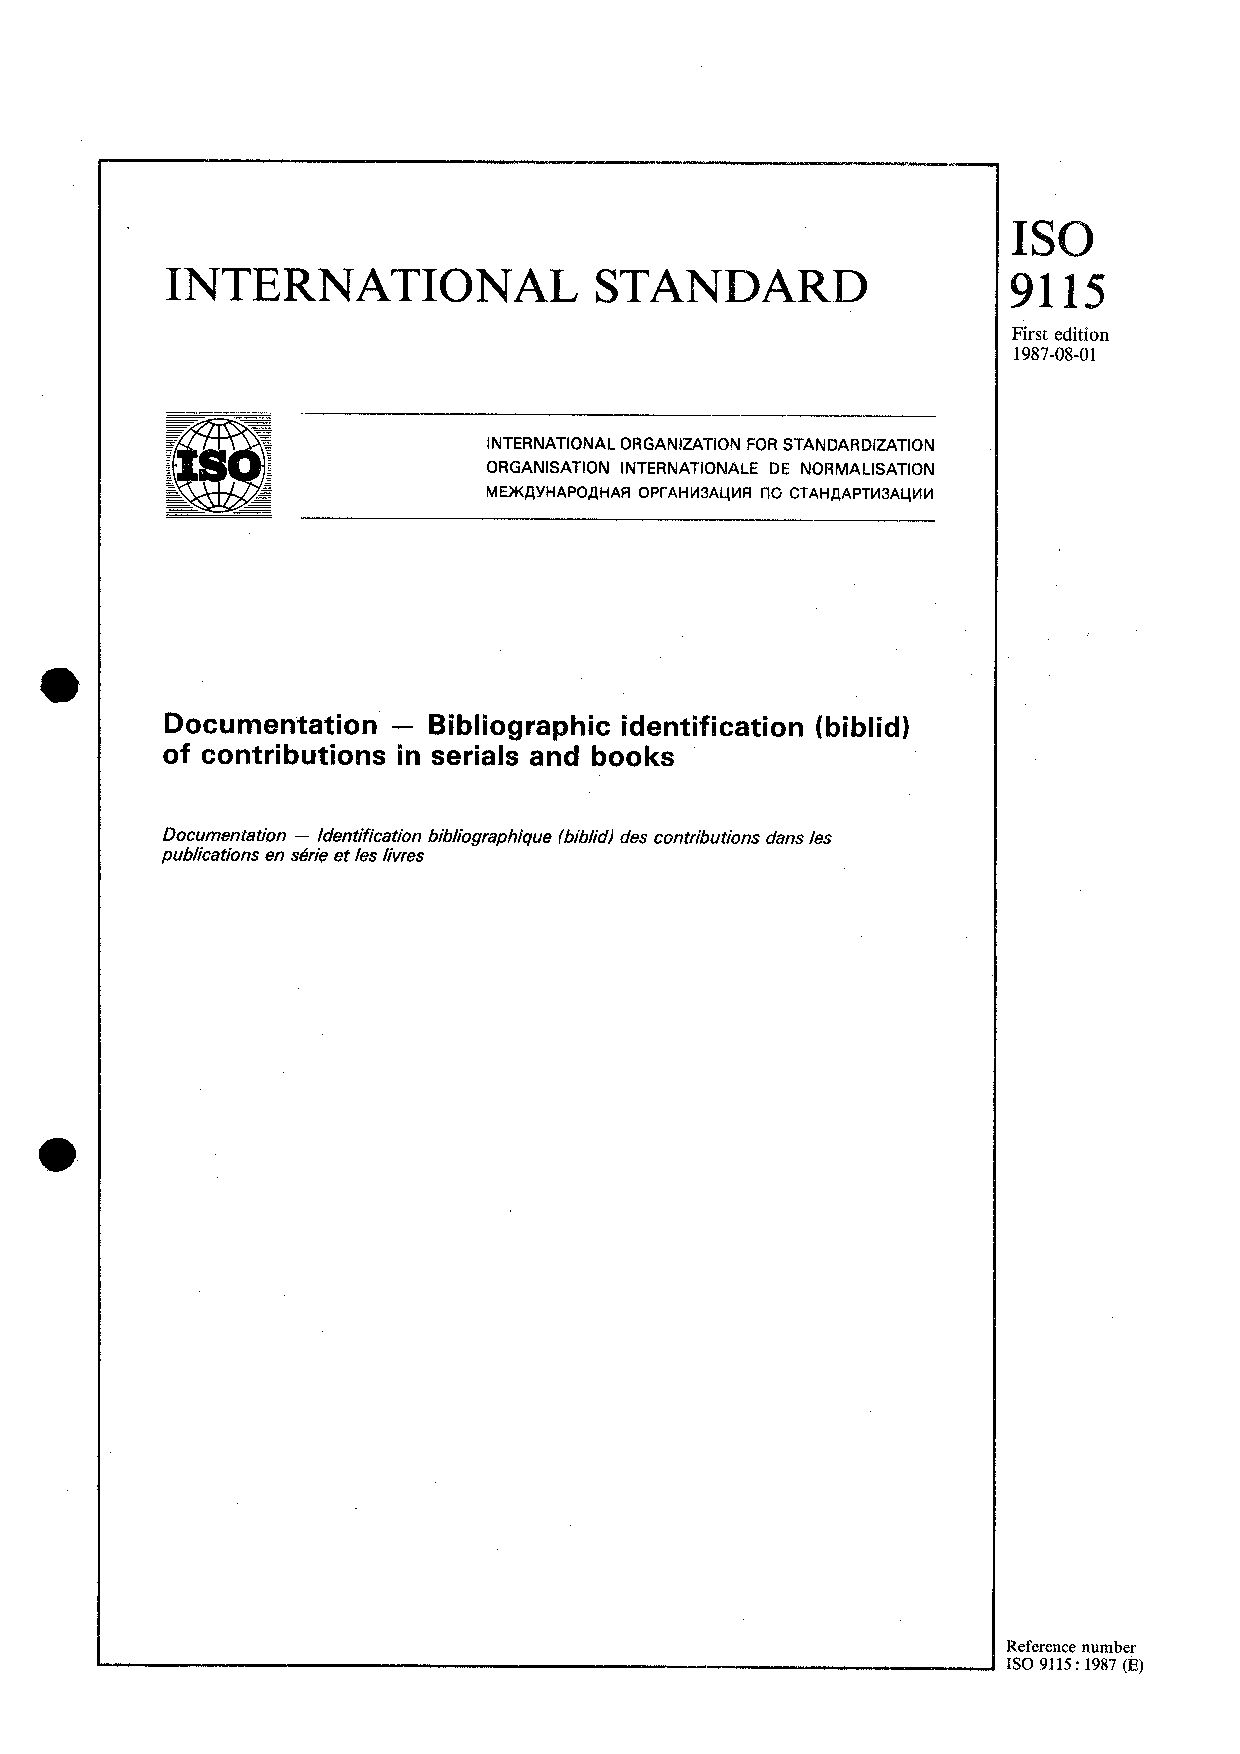 ISO 9115:1987